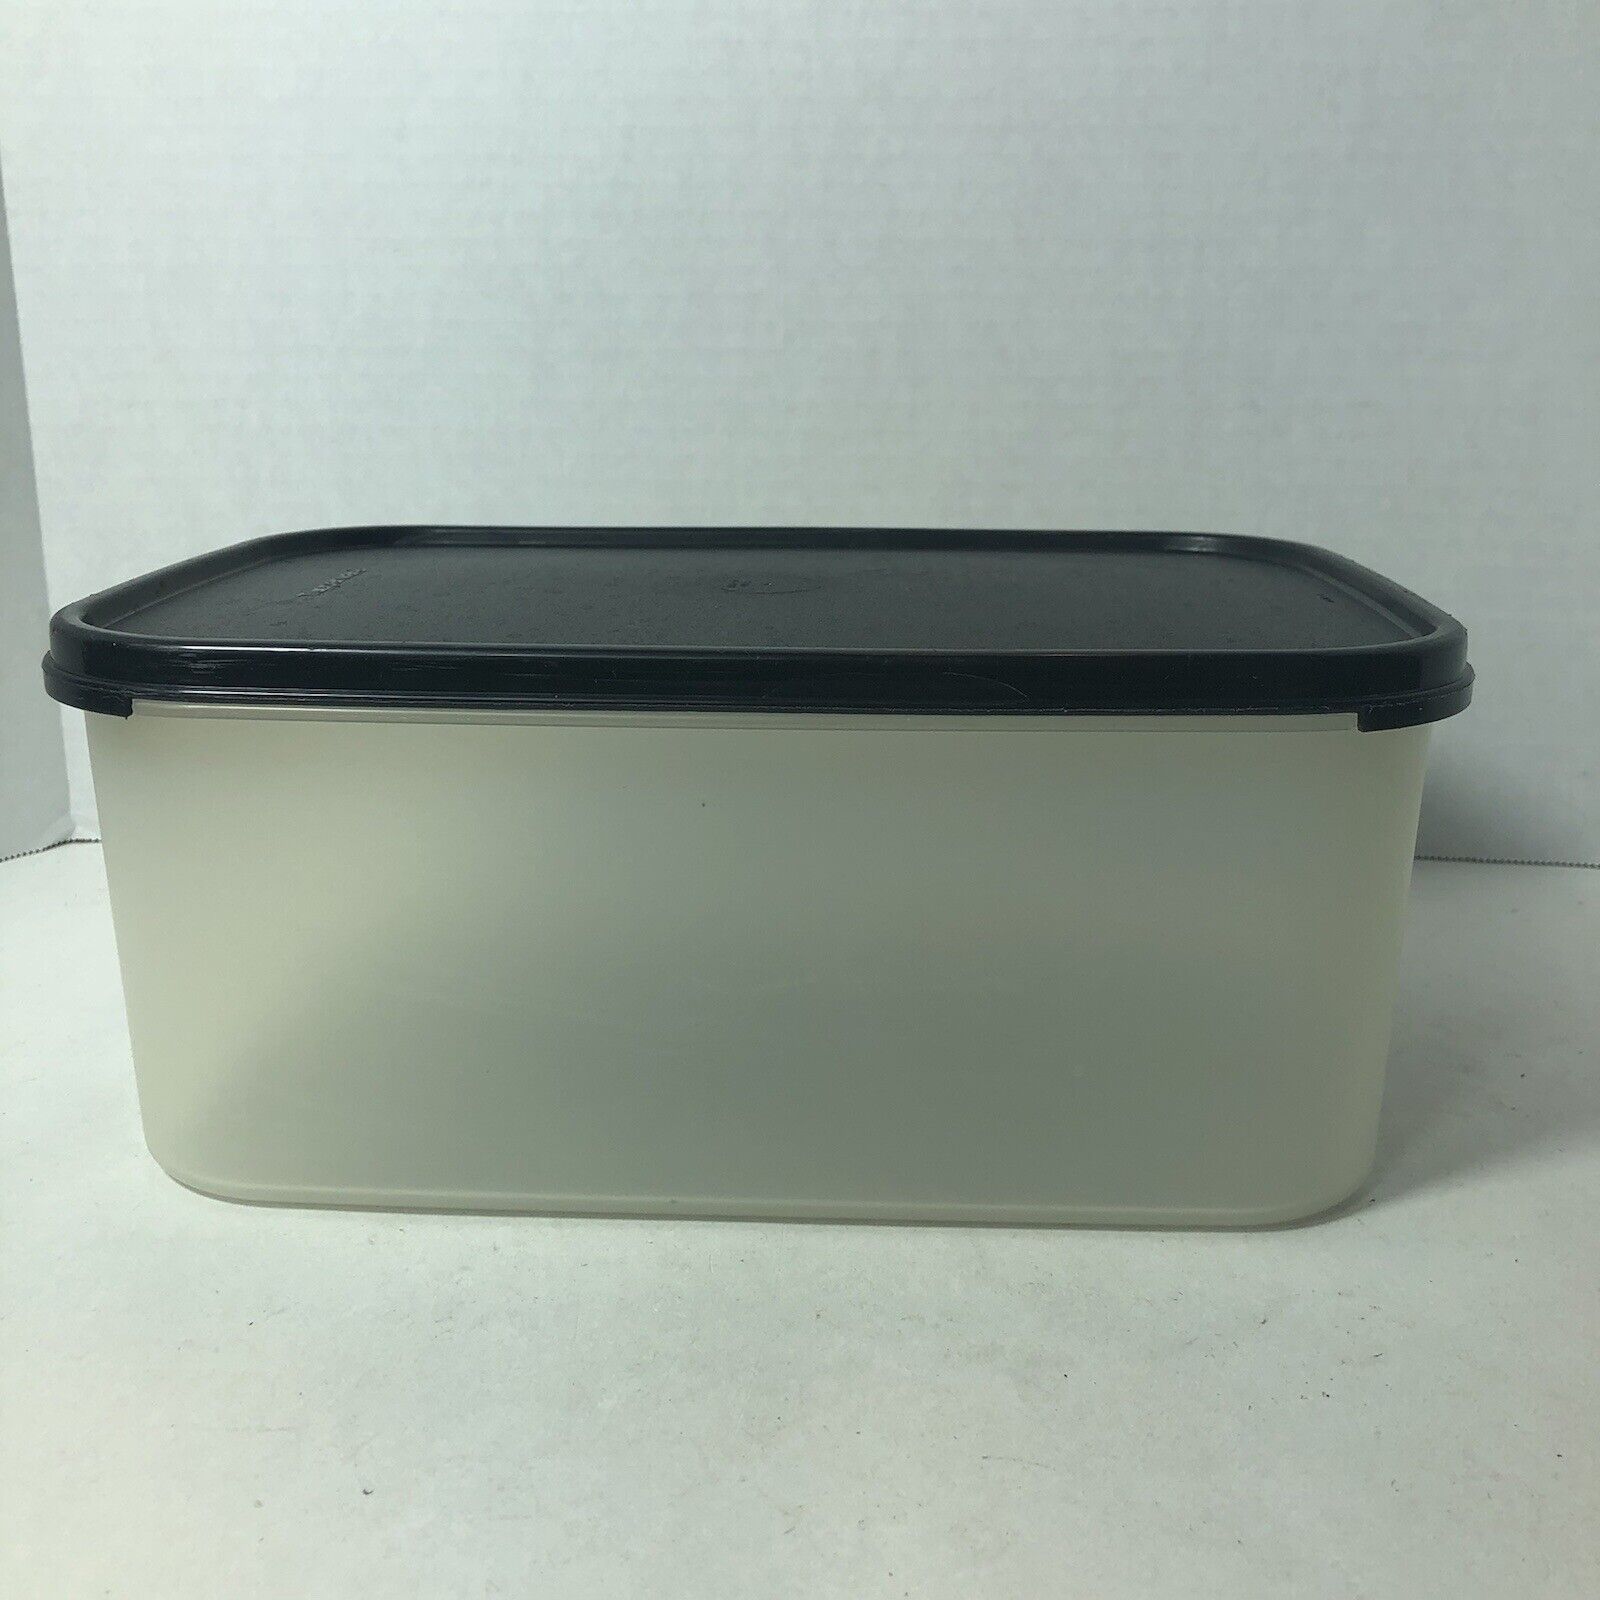 Tupperware Modular Mates Rectangle Storage #2 Container 18 Cup #1609 Black Lid D